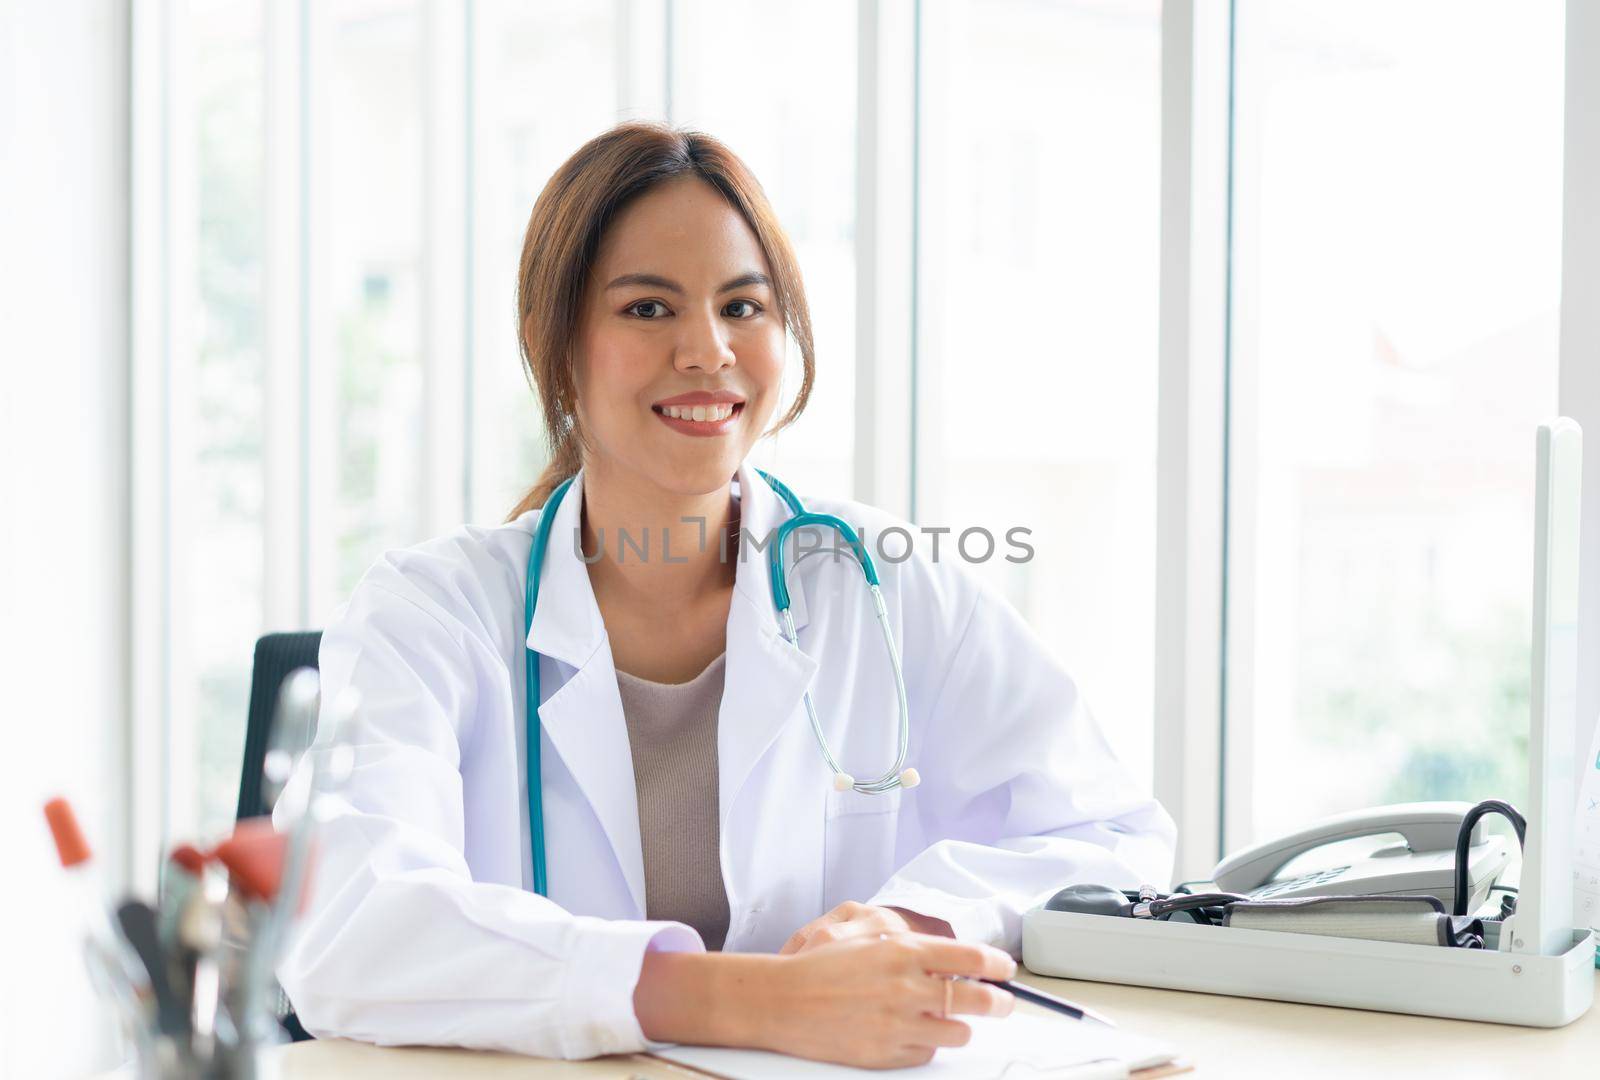 A female doctor works in an office at a hospital or clinic.  Smile and confident woman by Buttus_casso